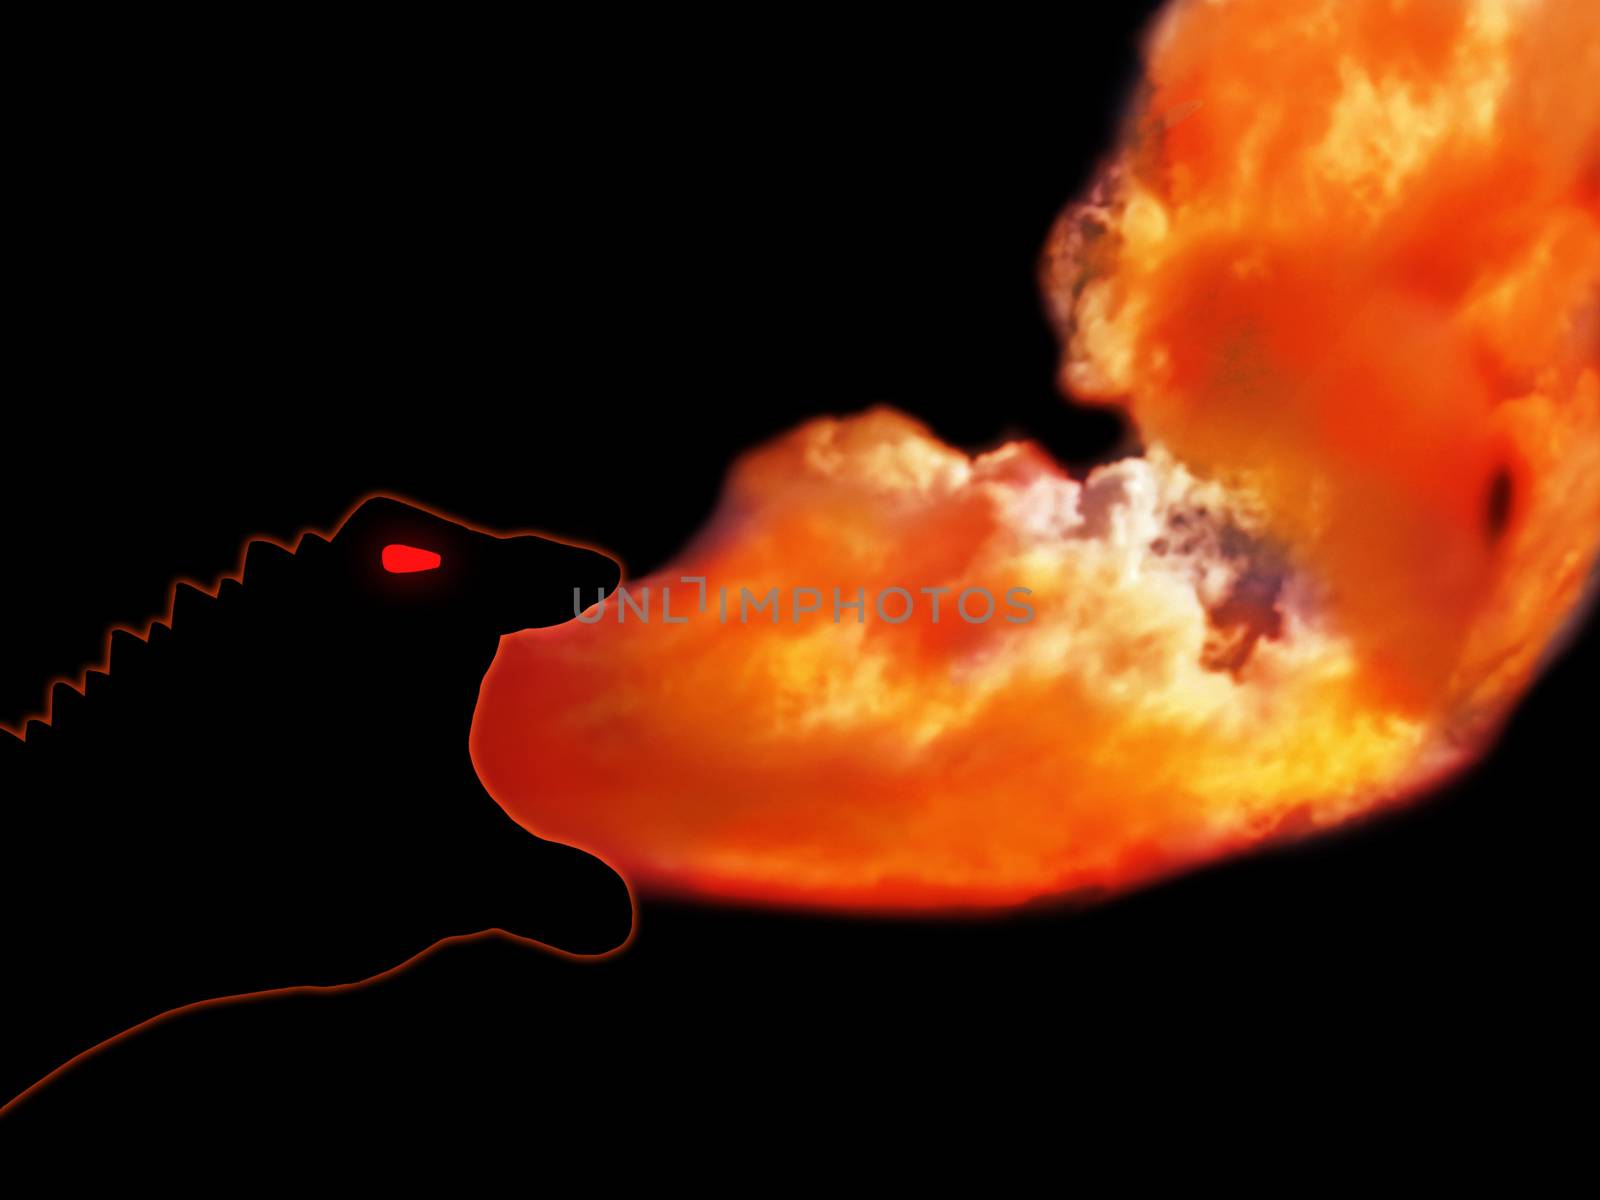 Hand dragon spitting fire, black background by fjanecic